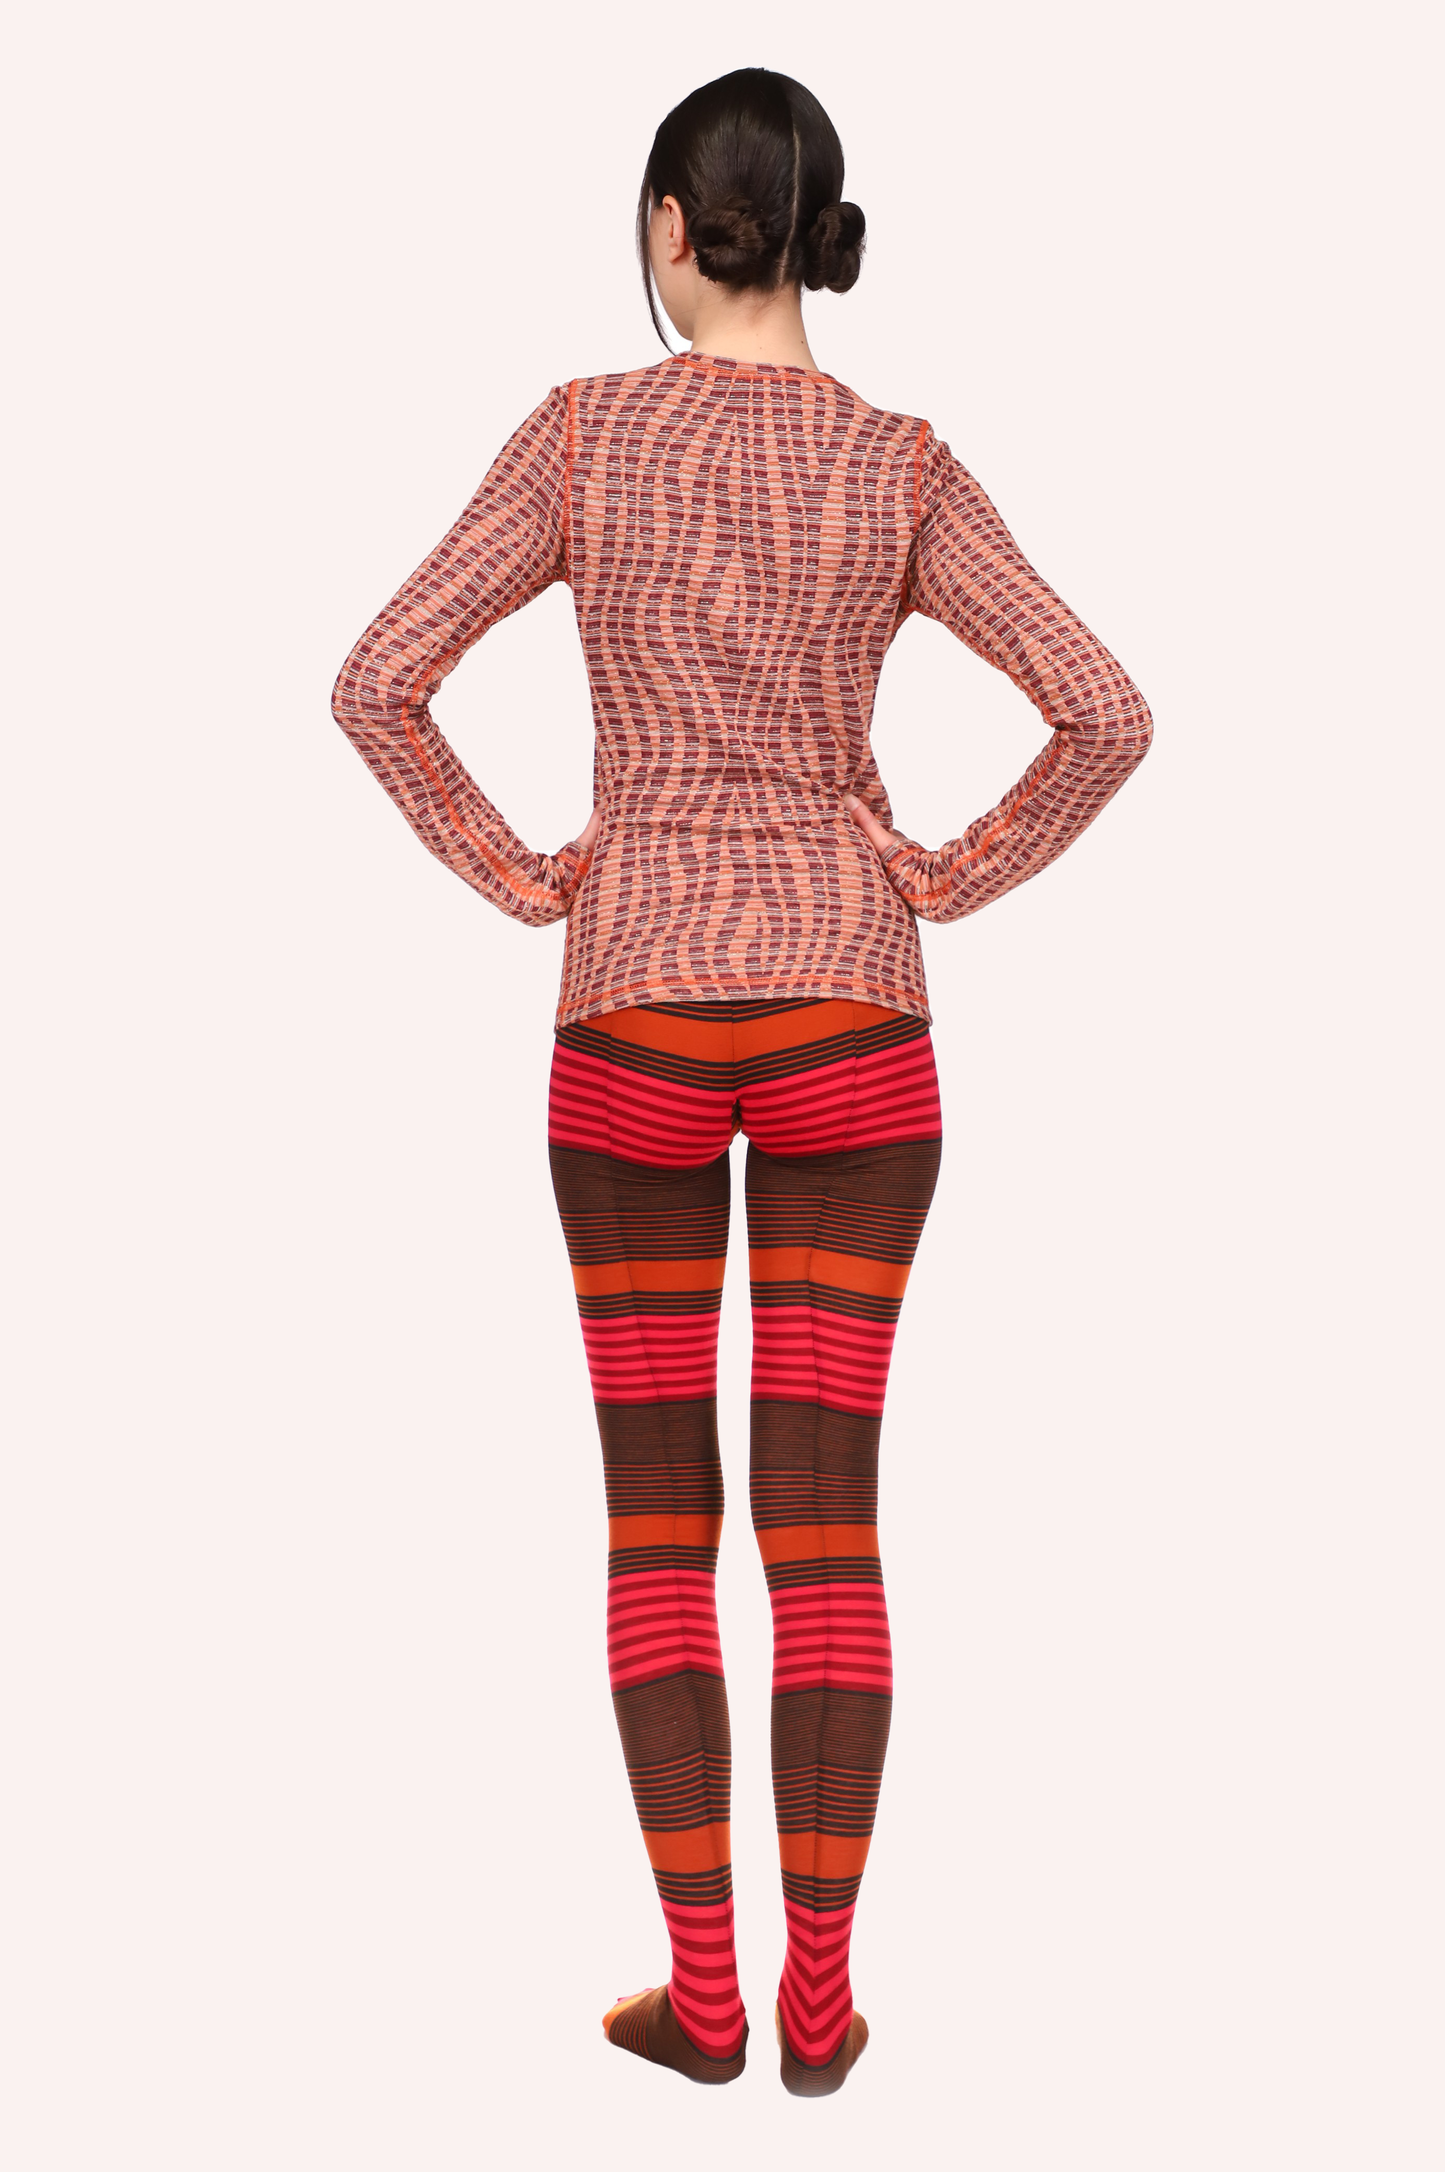  Mod Stripe Knit Tights Orange, seam runs down the back of the legs, from the top to the bottom